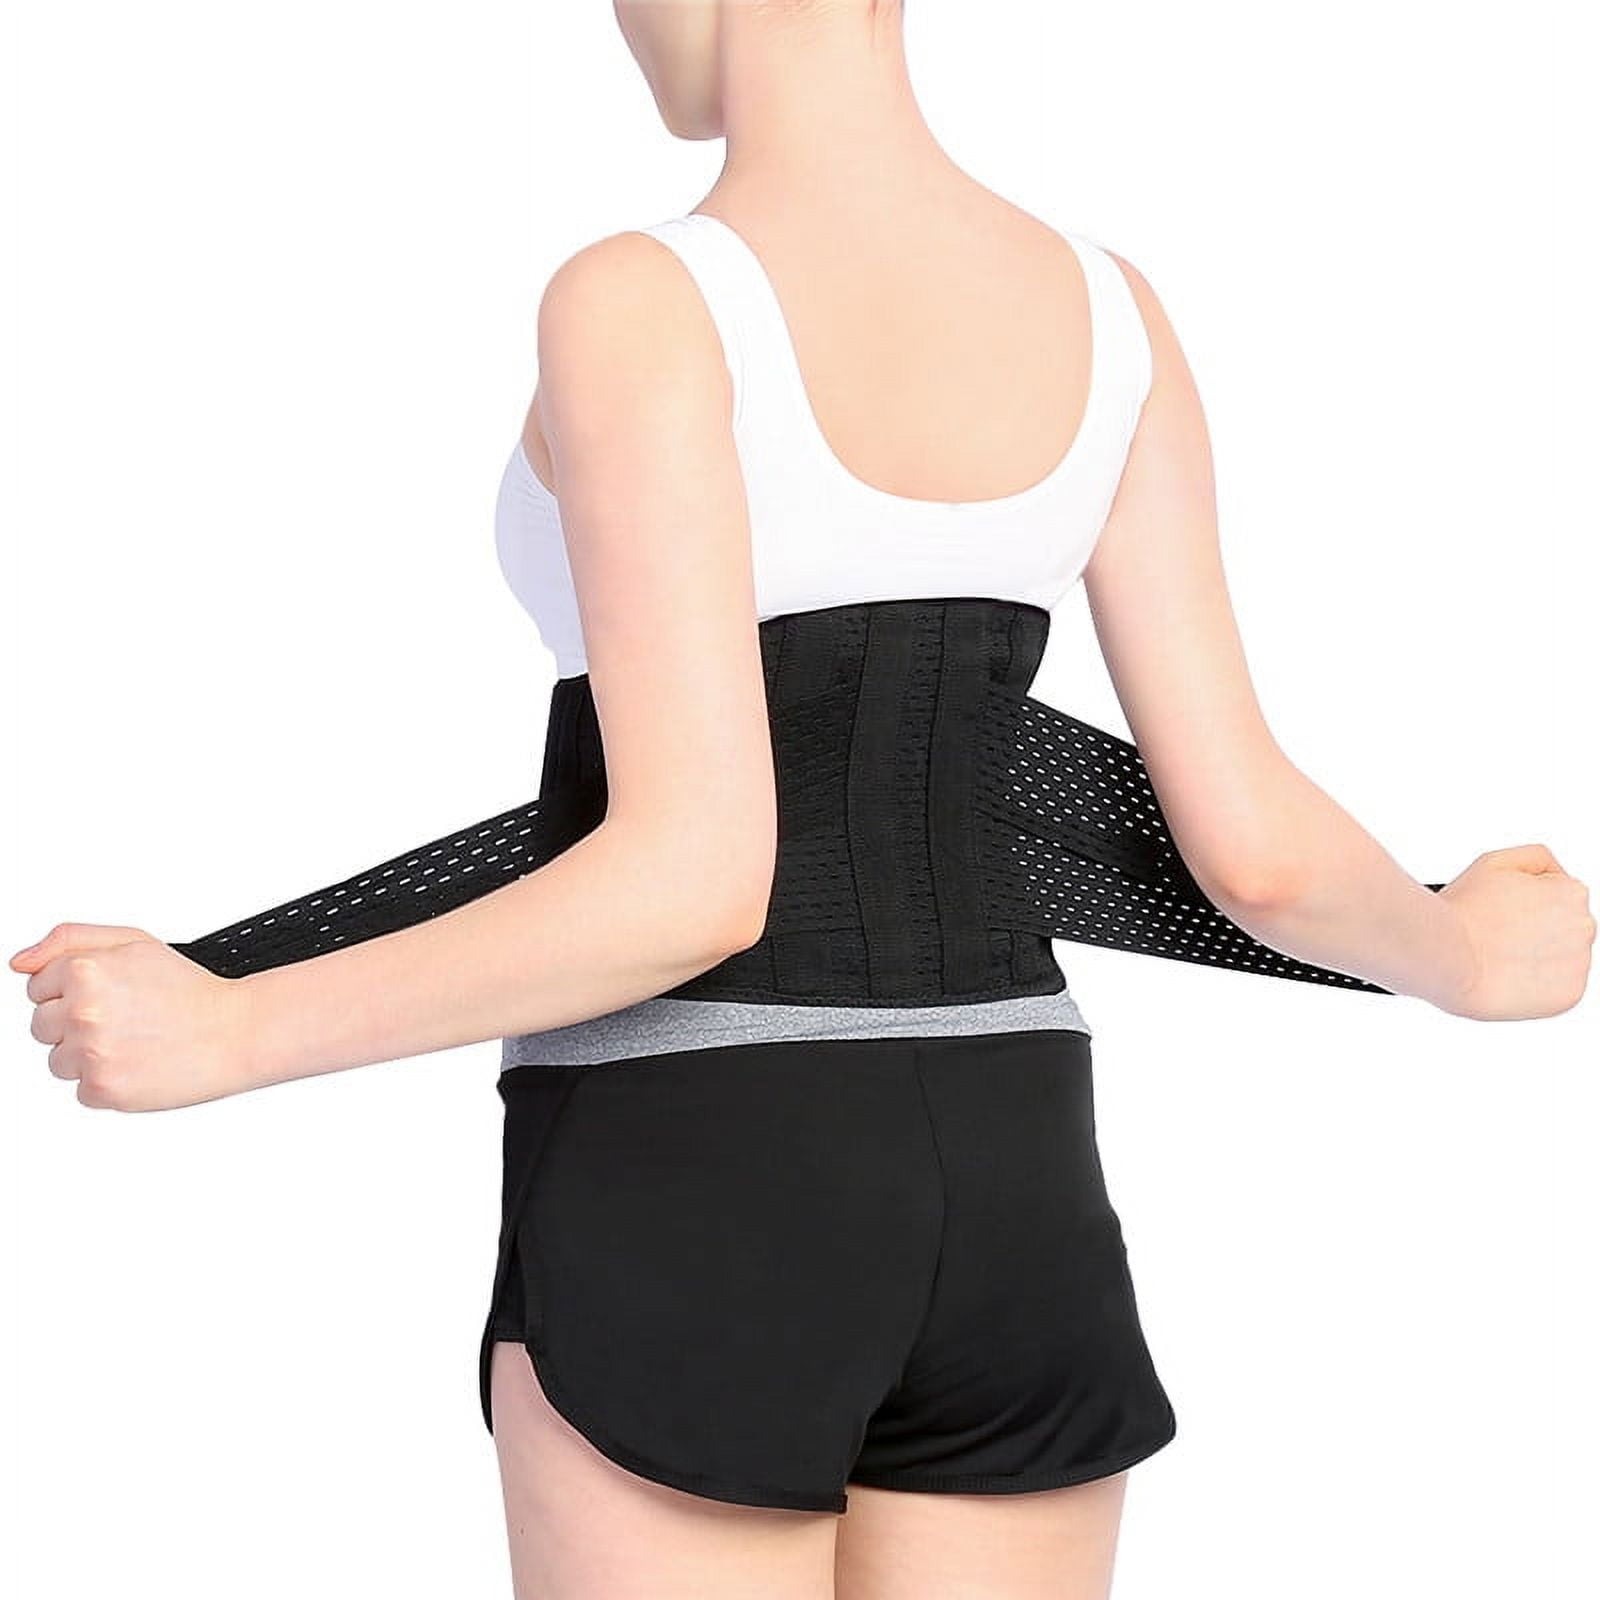 Paskyee Back Brace for Lower Back Pain Relief, Sciatica, Back Strap Support  for Men Women working out, lumbar support Belt Medium